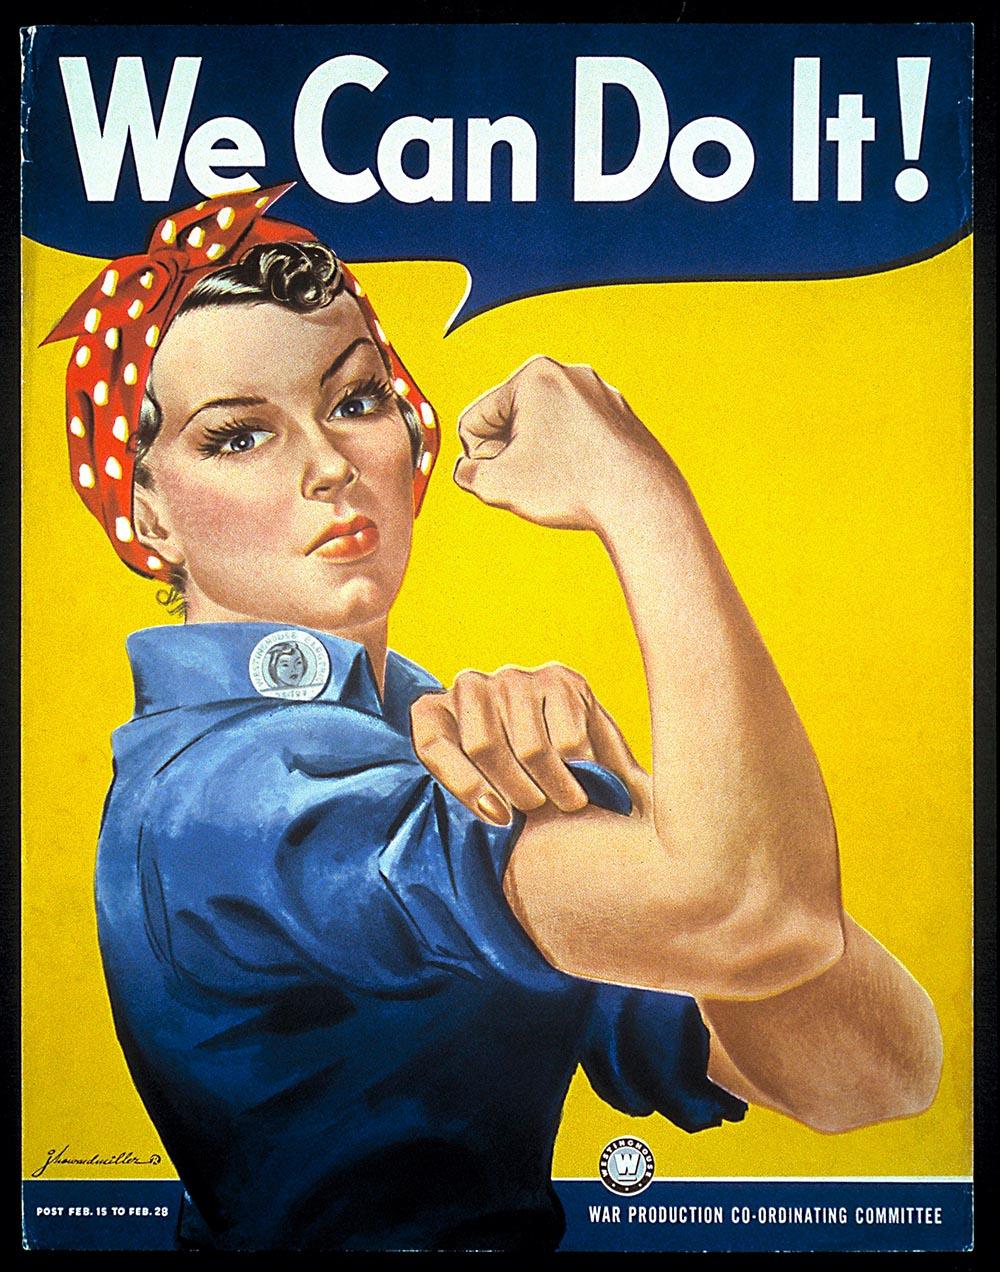 J. Howard Miller, World War II Iconic Poster "We Can Do It!"